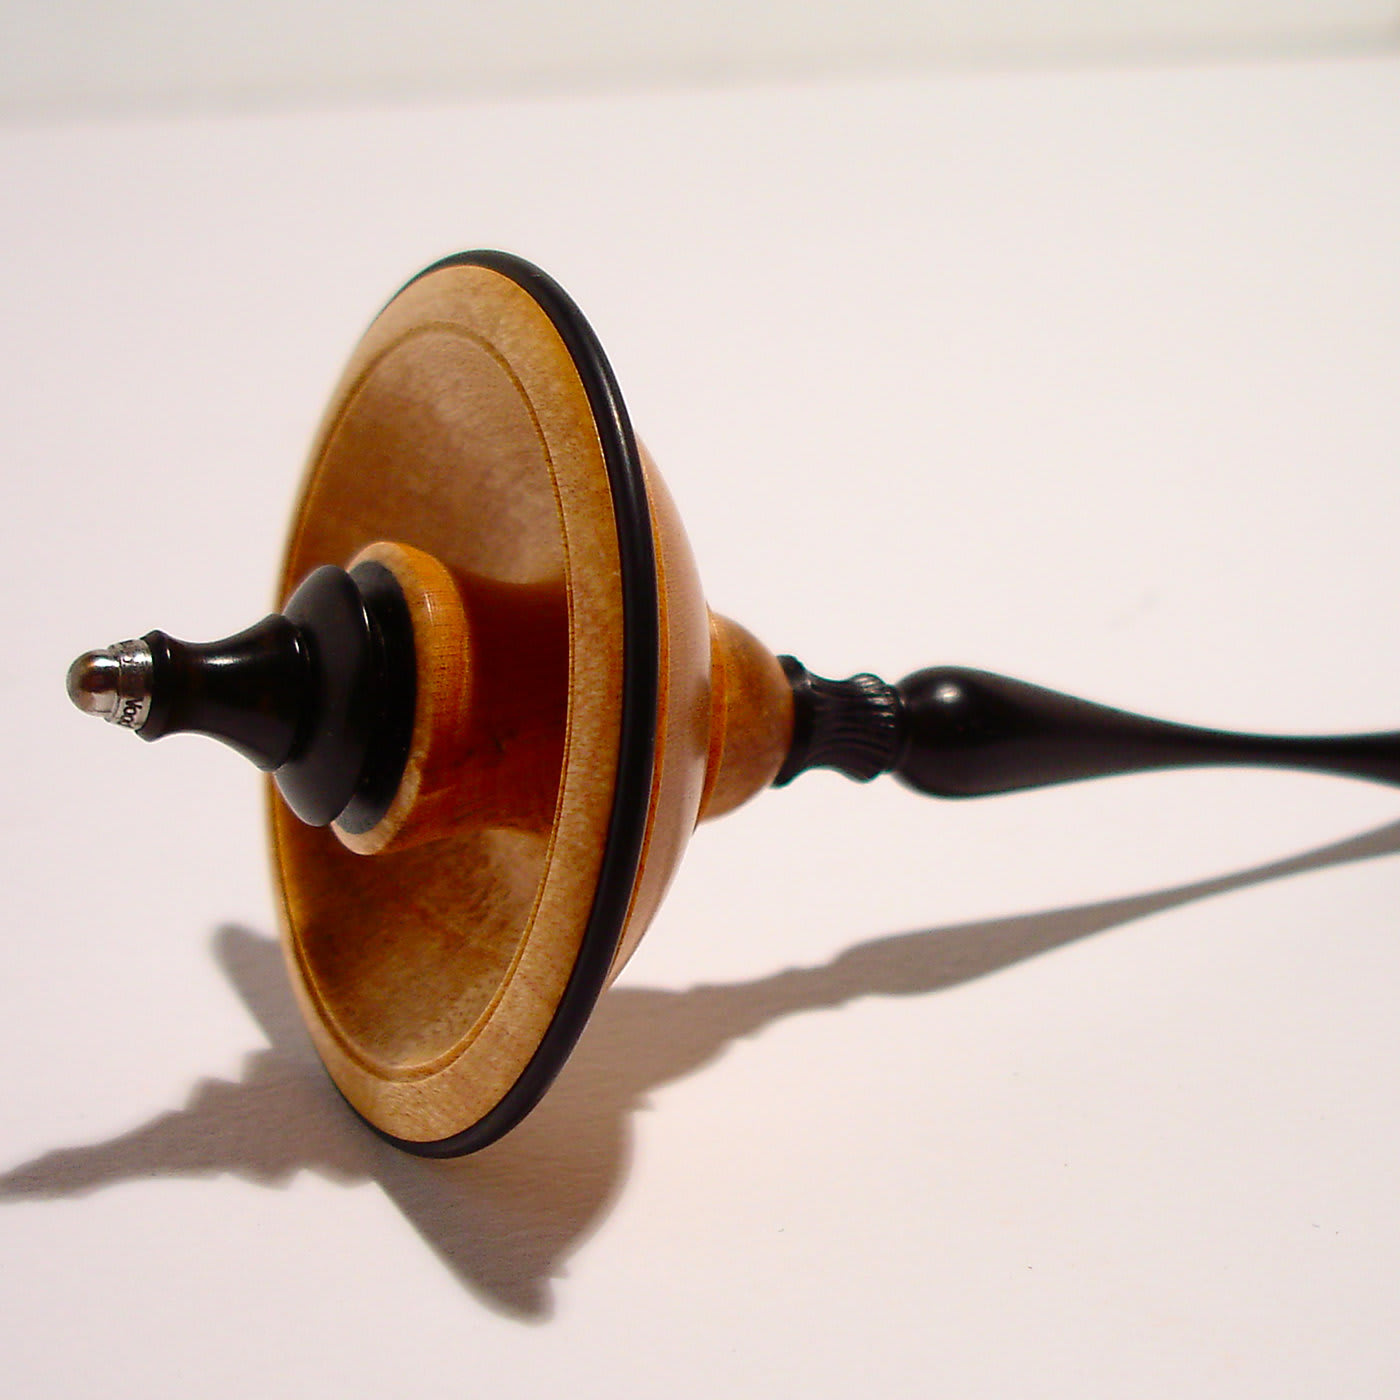 Ebony and Maple Spinning Top #1 - Mauro Sarti